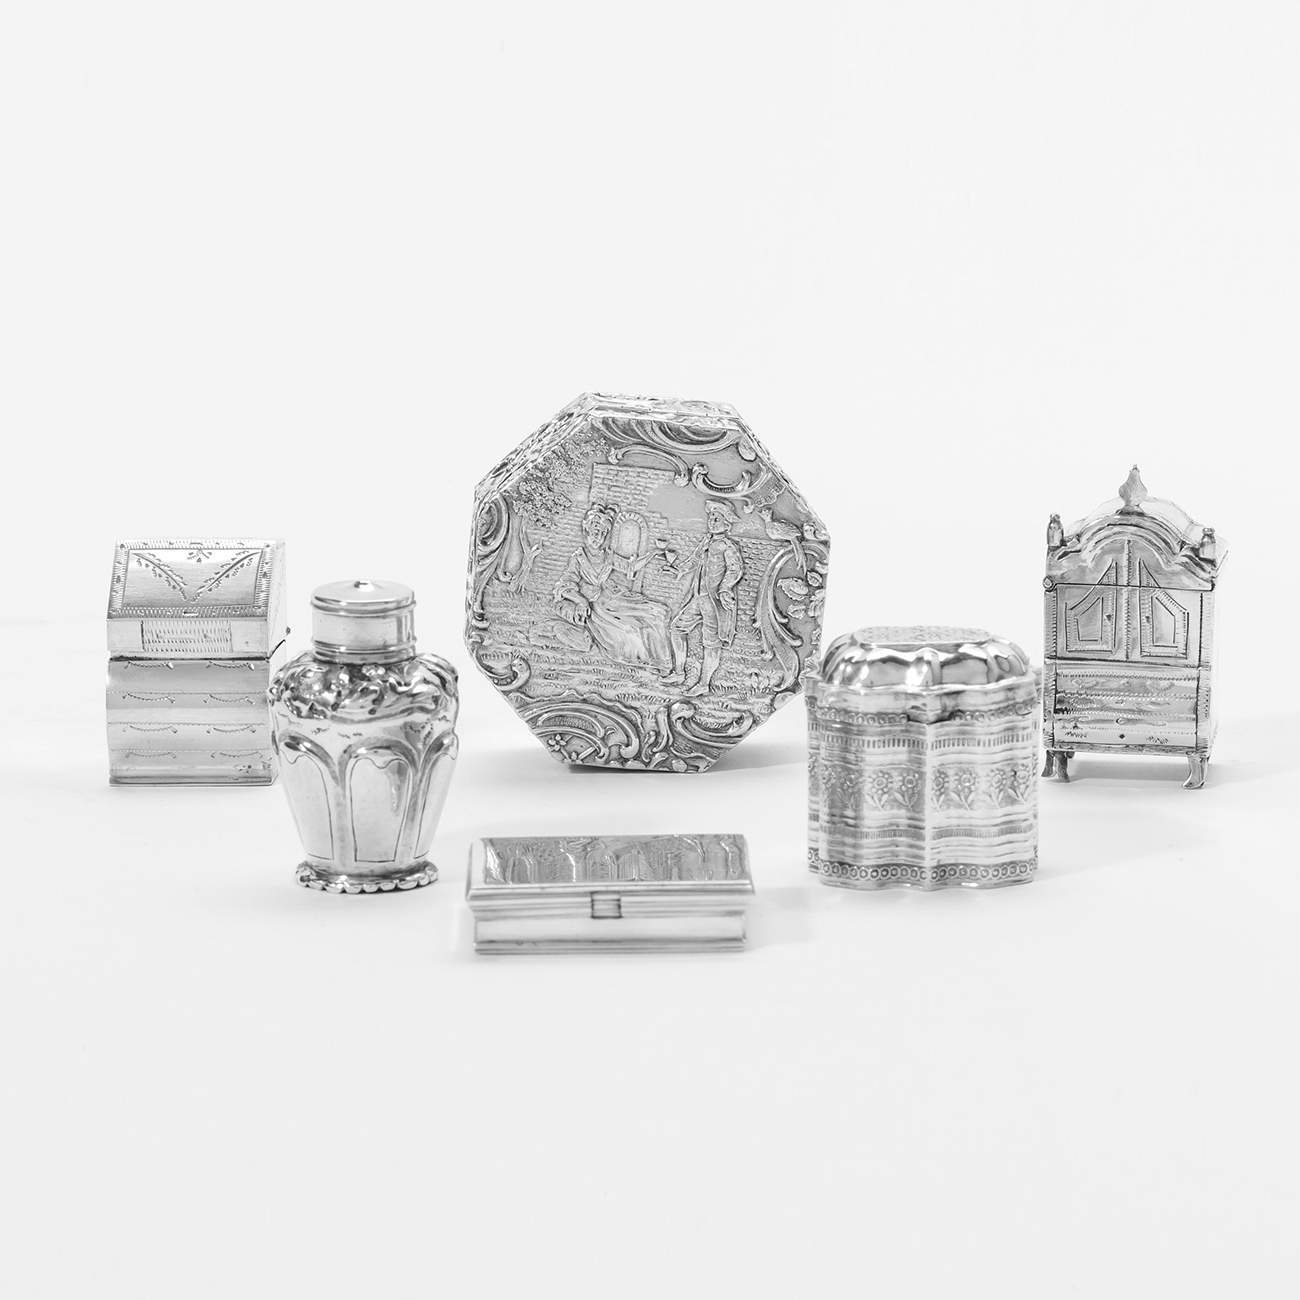 Three silver lodderein boxes, a silver pillbox, a silver miniature tea caddy with lid and a silver